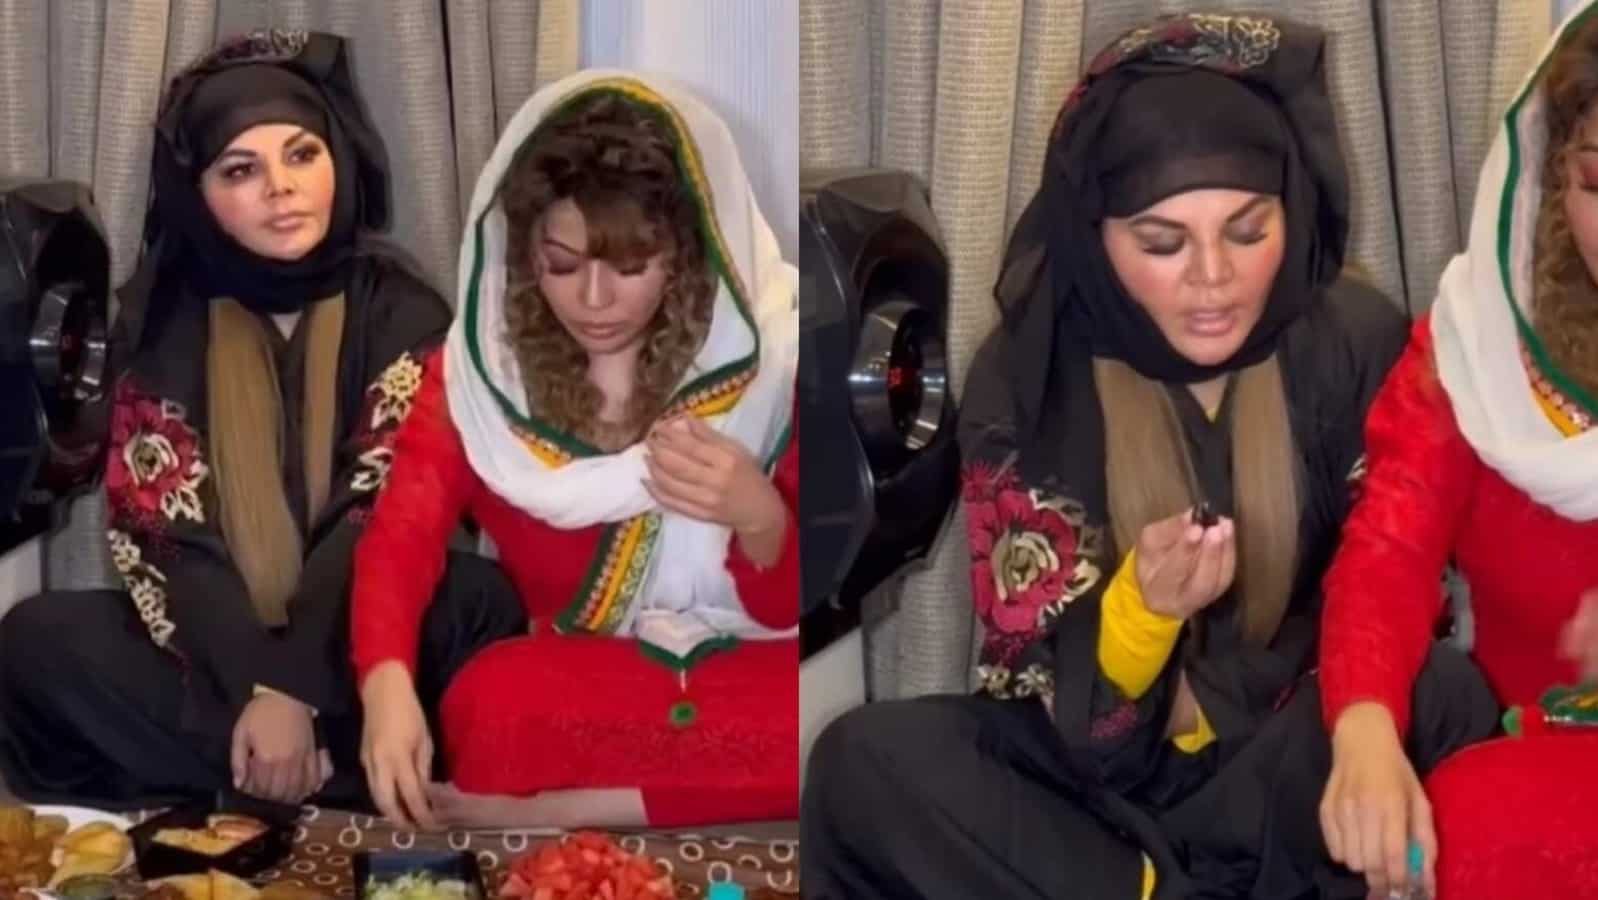 Rakhi Sawant wearing burqa iftar party with friends, users trolled, said- gimmick